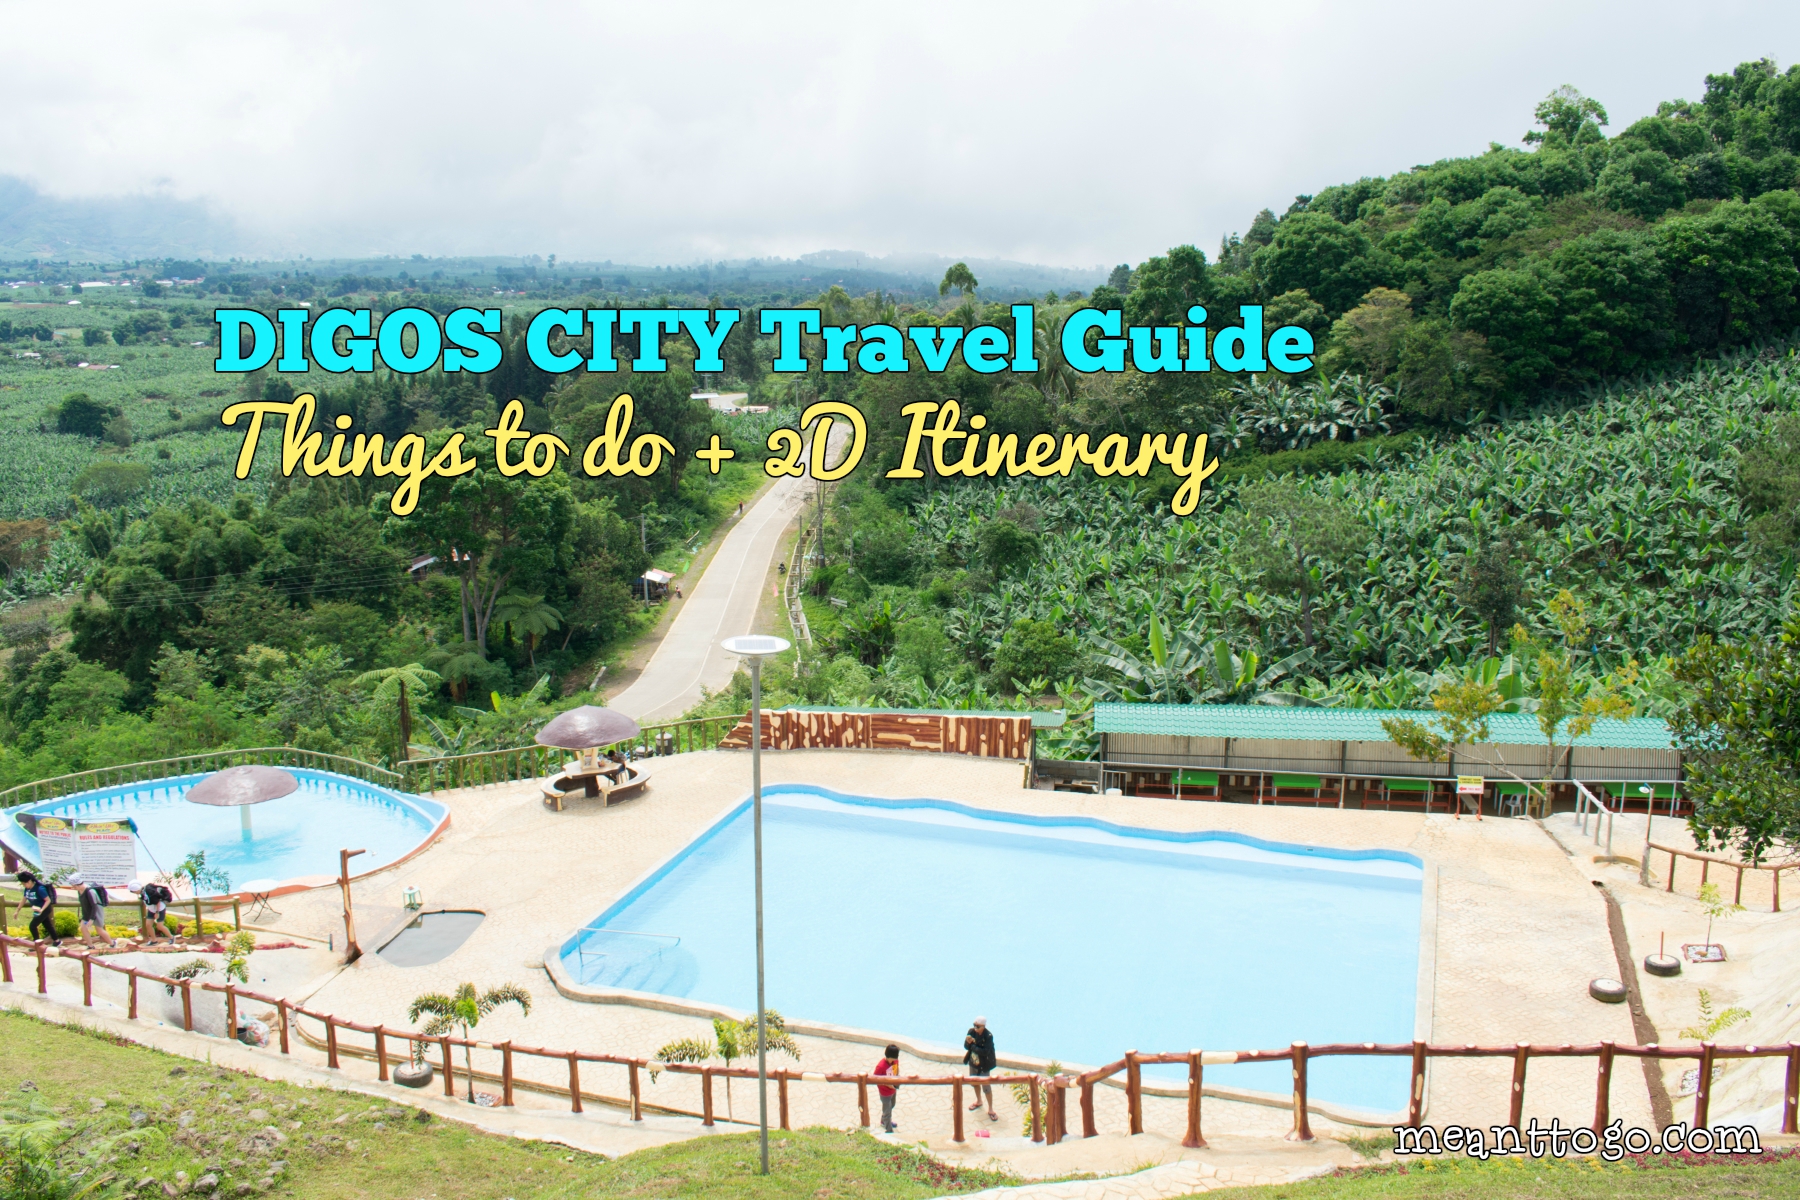 Travel Guide: Things To Do In Digos City + 2D Itineary